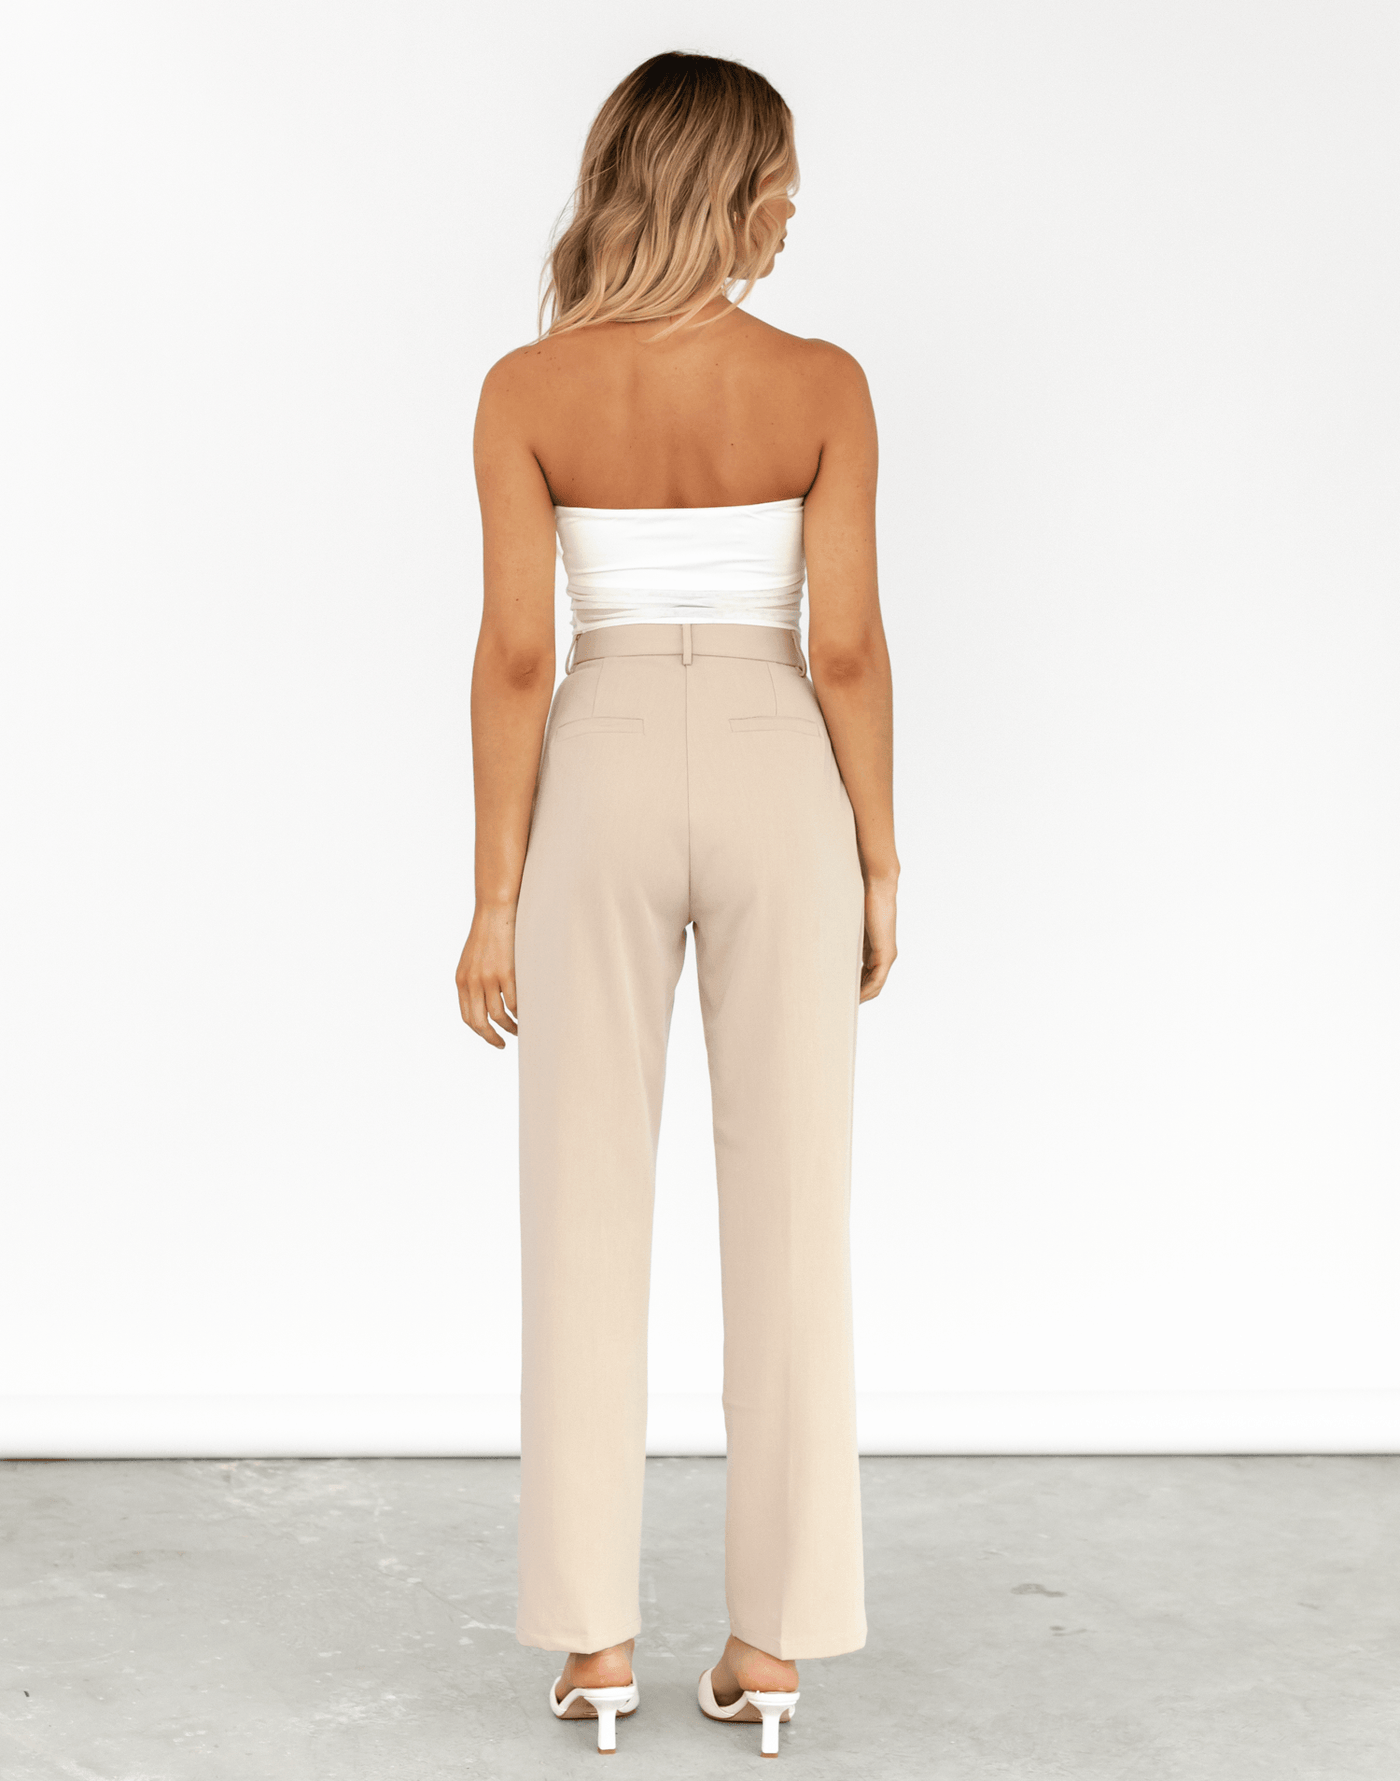 Shayla Pants (Beige) - Loose Fit Tailored Pant - Women's Pants - Charcoal Clothing